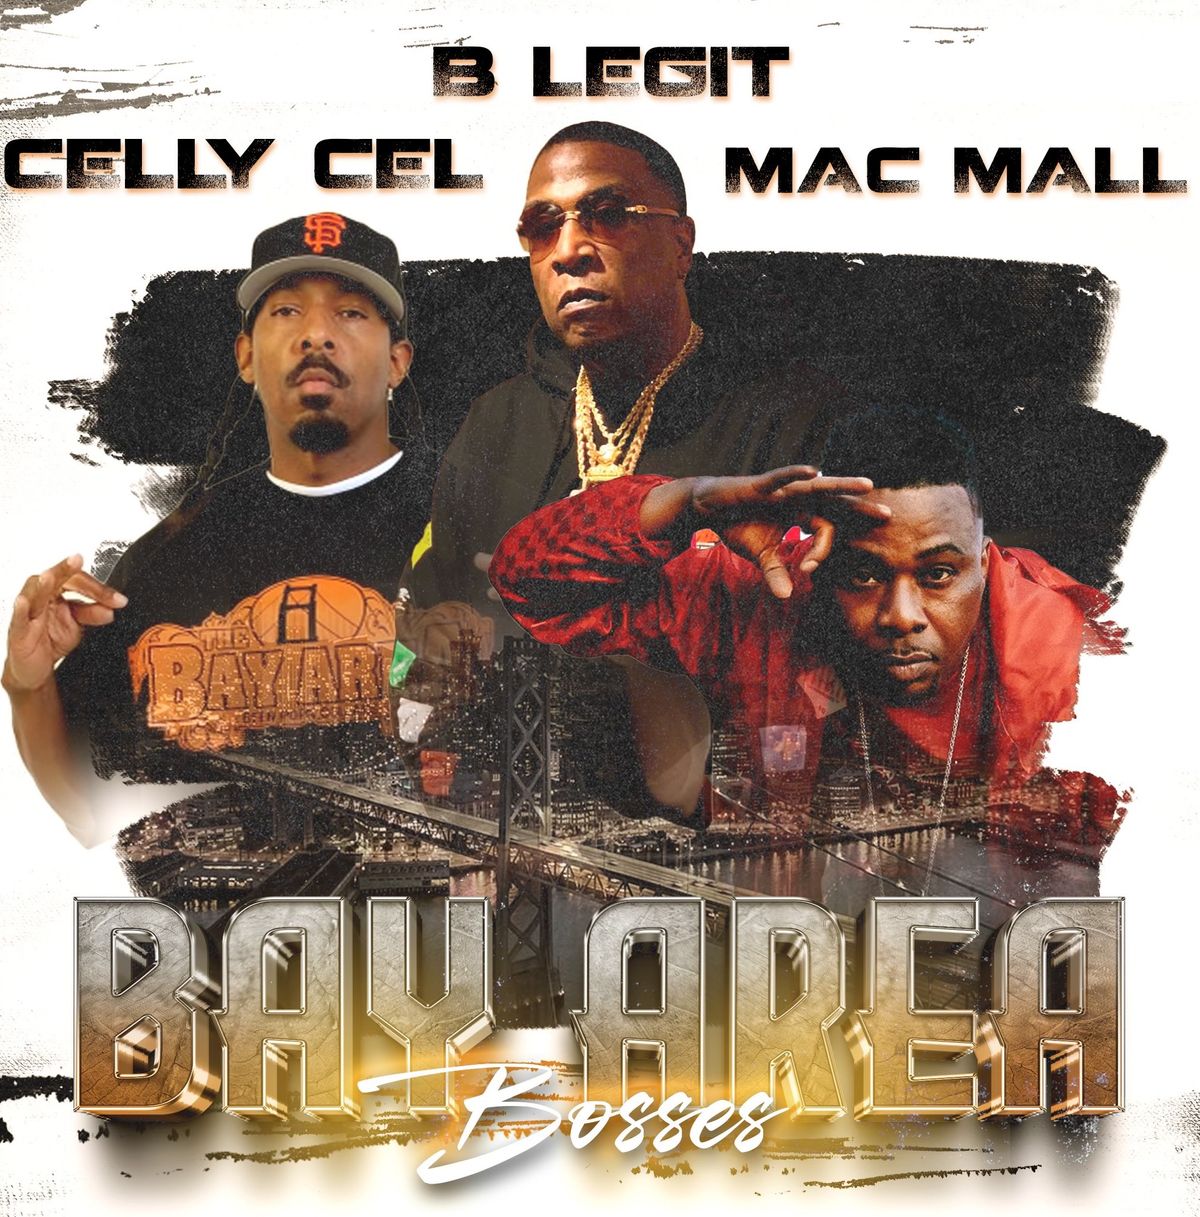 Bay Area Bosses Tour with B Legit, Celly Cel & Mac Mall